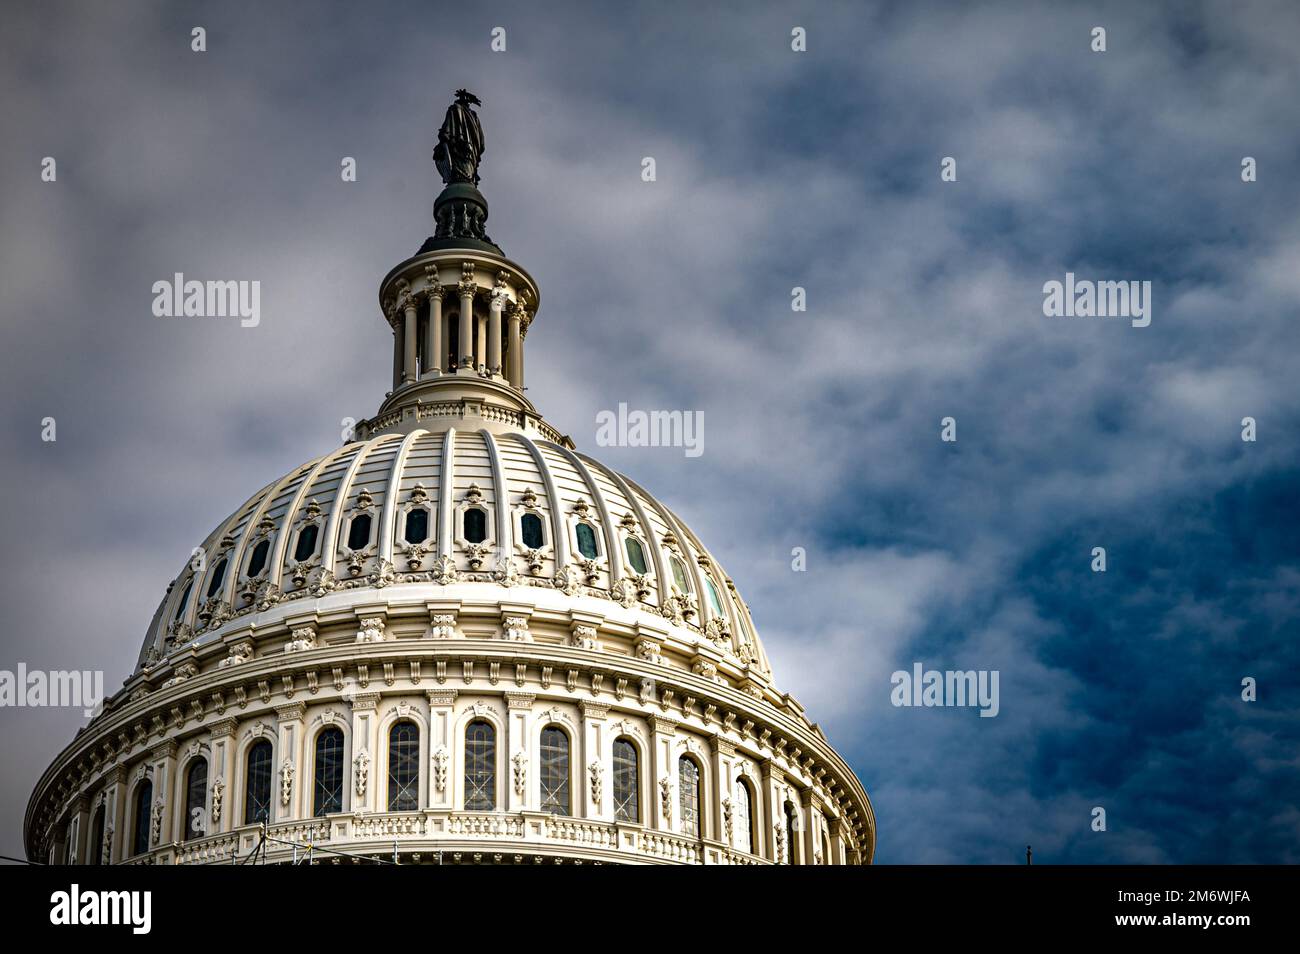 Close up view of dome of Capitol building in Washington, D.C. on a cloudy and moody day. Stock Photo